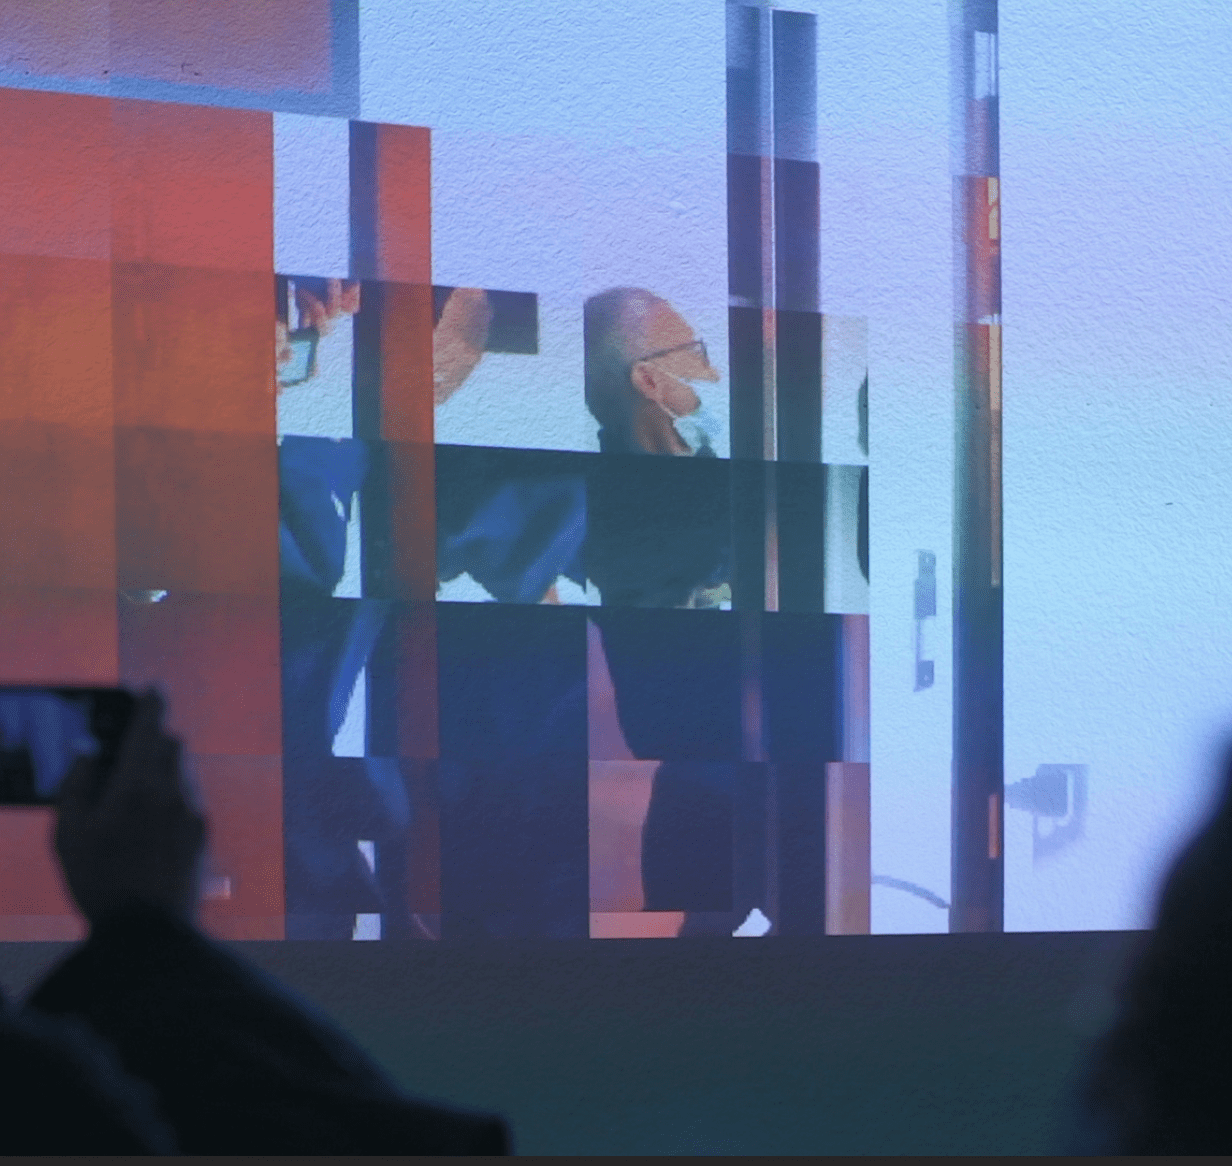 A fragmented video is projected onto a wall. The video displays life video from the room, shattered in a grid pattern, and sometimes mirrored.